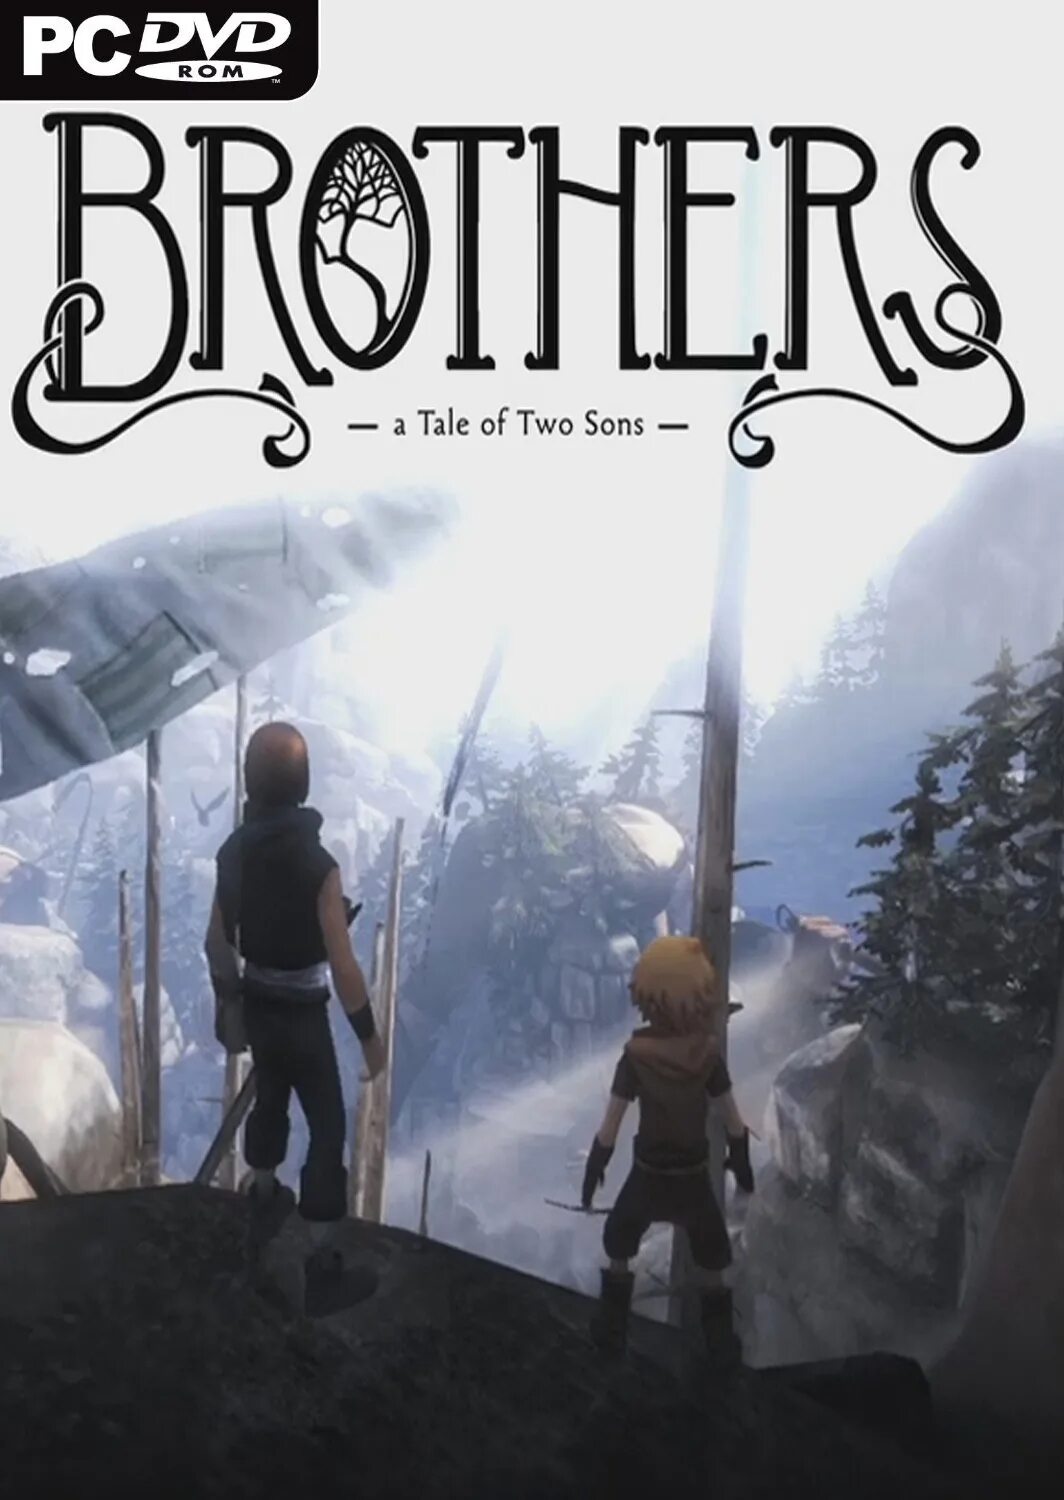 A tale of two sons ps4. Игра brothers a Tale of two sons. Brothers a Tale of two sons ps4. Brothers: a Tale of two sons (2013). Brothers: a Tale of two sons Xbox 360.